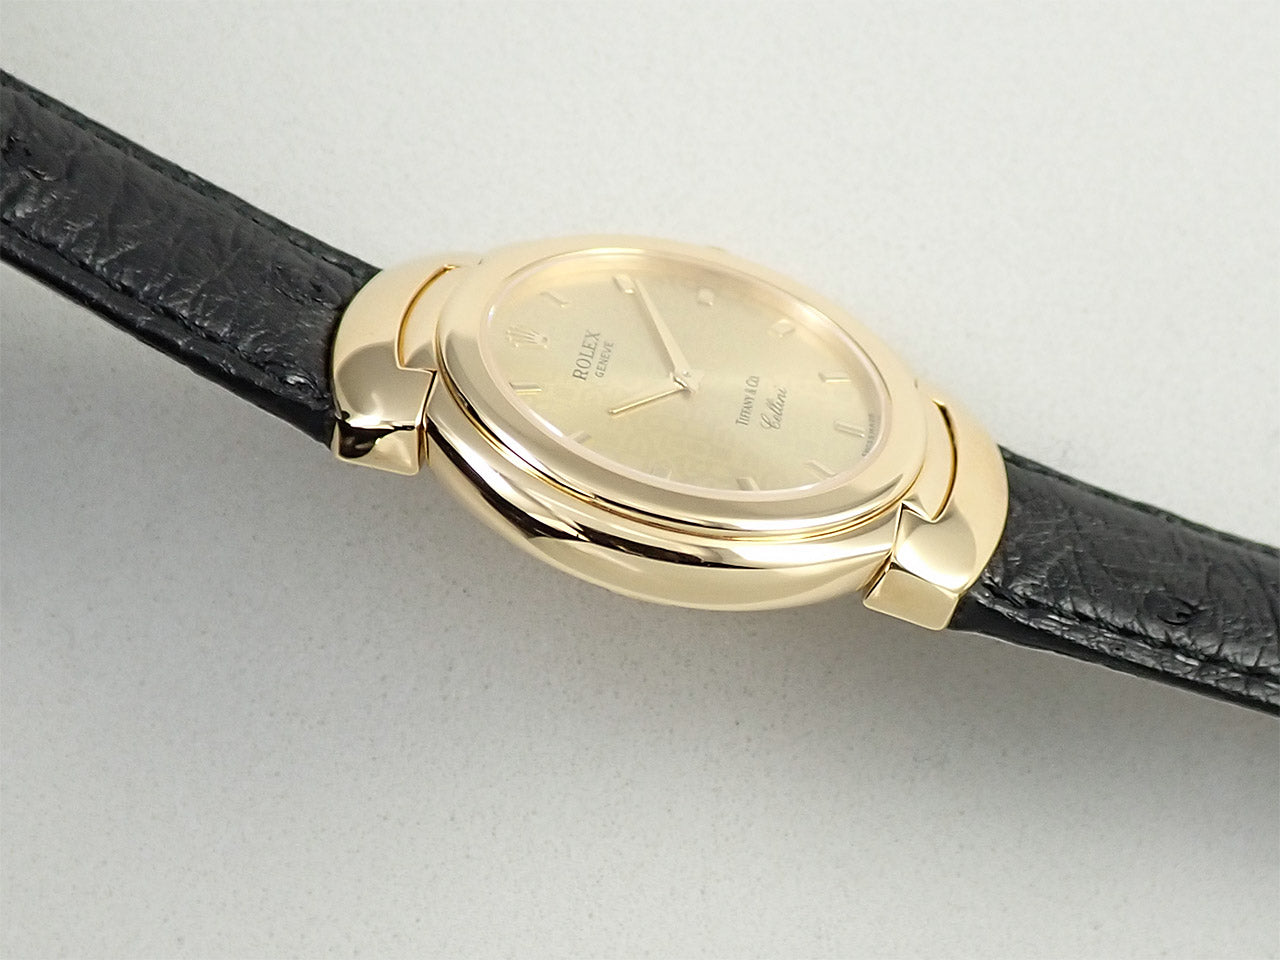 Rolex Cellini Ref.6622 YG Champagne Gold x Computer Dial